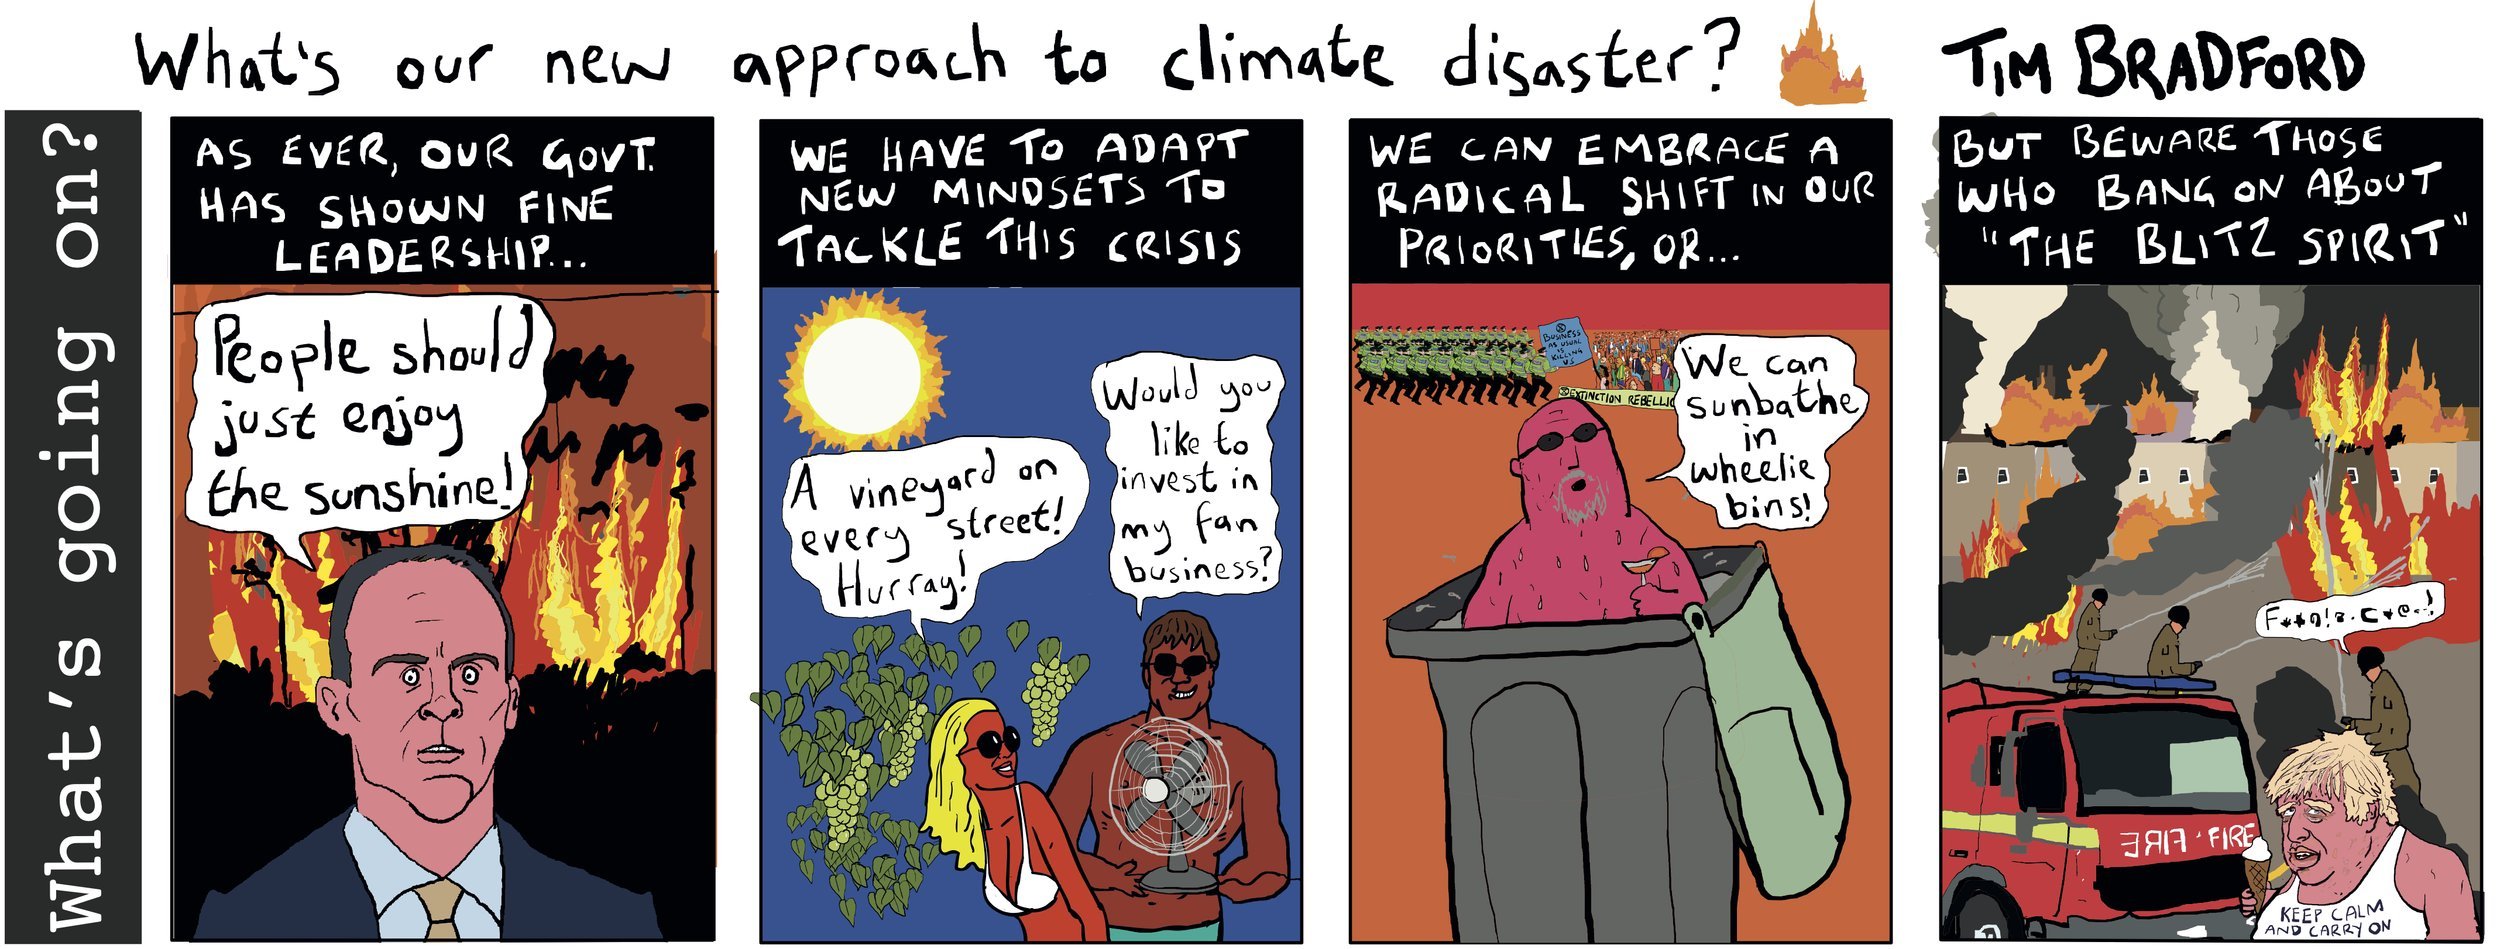 What's our new approach to climate disaster? - 21/07/2022